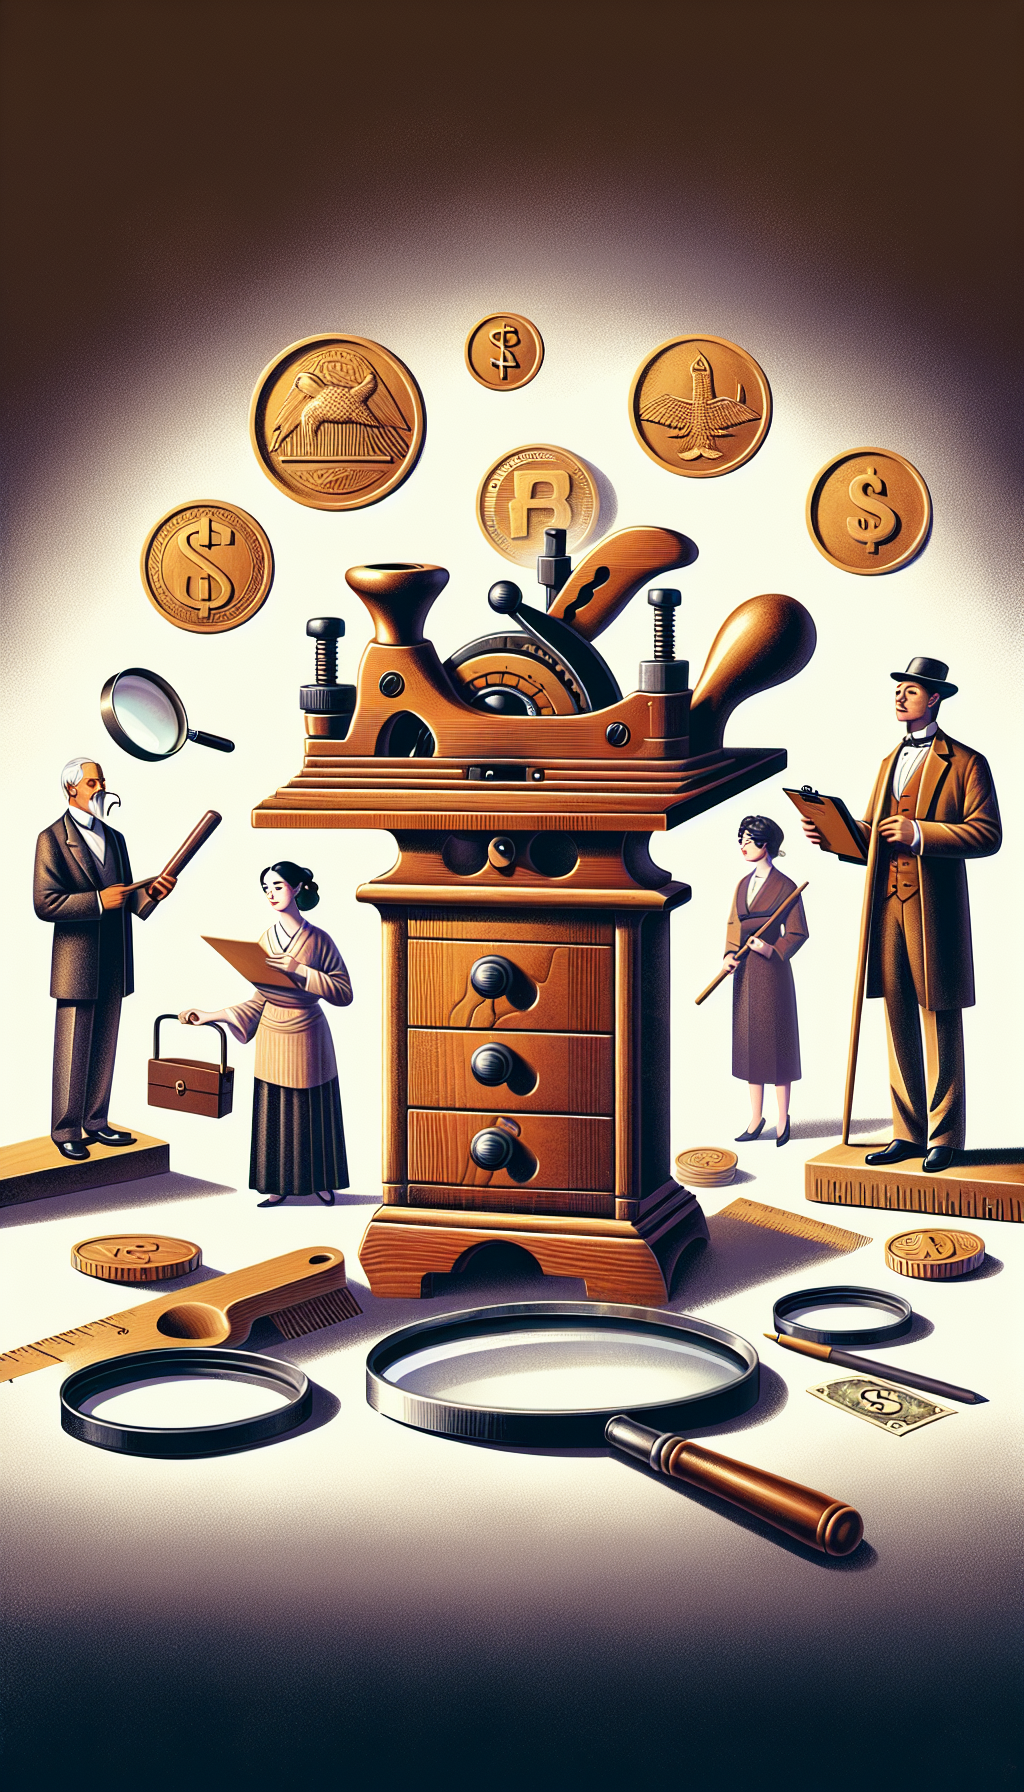 An illustration depicts an antique wood planer perched atop a pedestal, surrounded by magnifying glasses and various wooden coins symbolizing value, with expert collectors in classic attire examining it intently, each holding tools like an appraisal checklist, monocle, or auction hammer. Various currencies float in the background, subtly hinting at the fluctuating market values of these collectible tools.